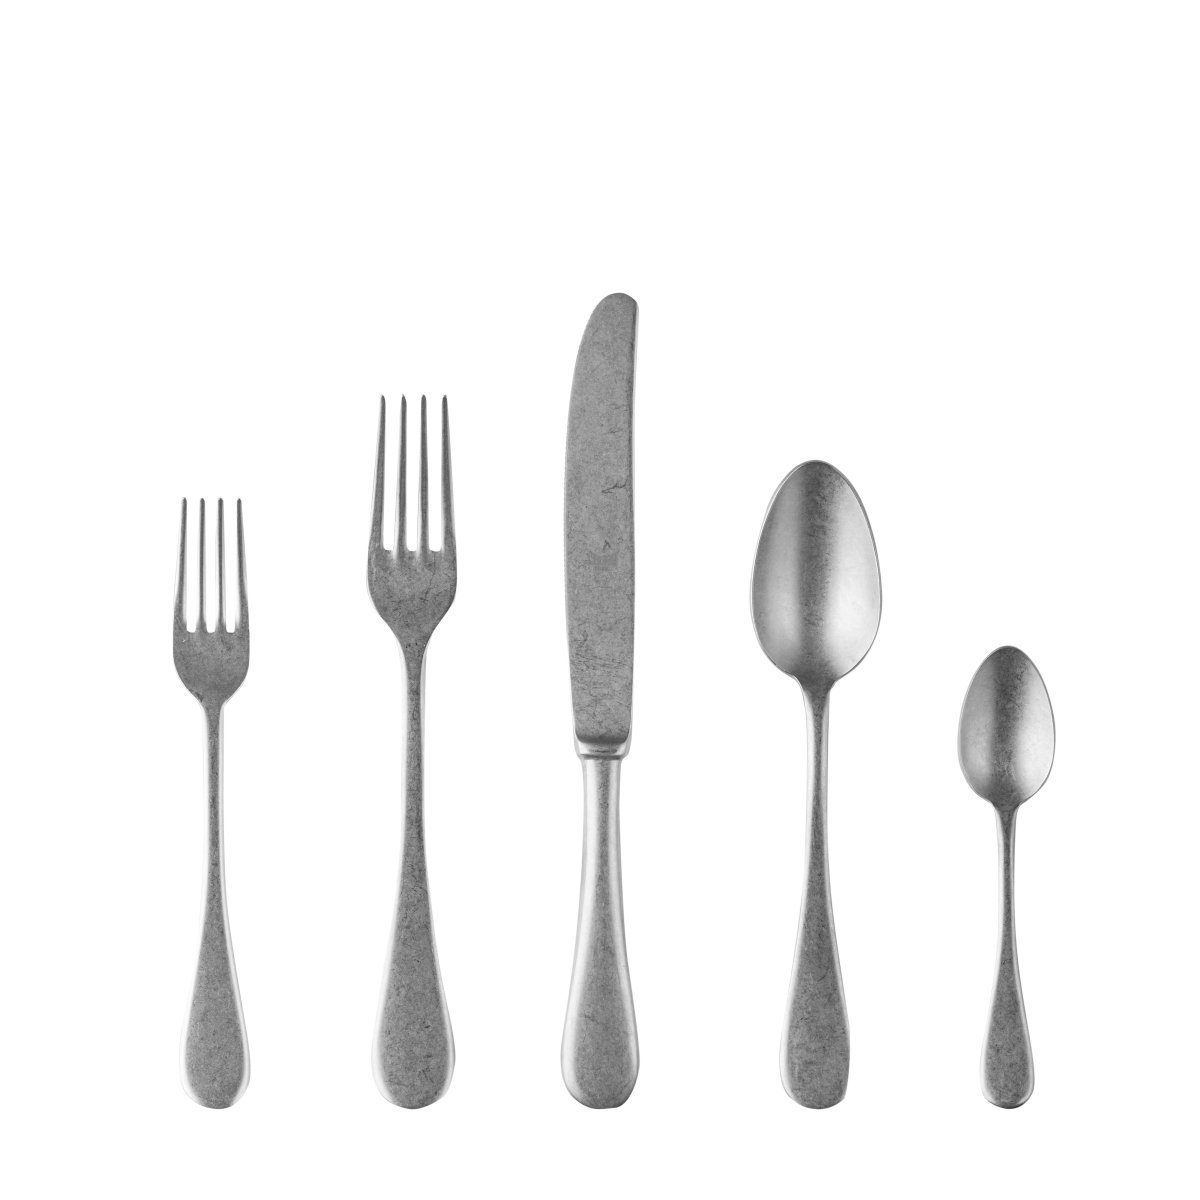 1026vi22005 Stainless Steel Place Setting Vintage Flat Ware Set - 5 Piece